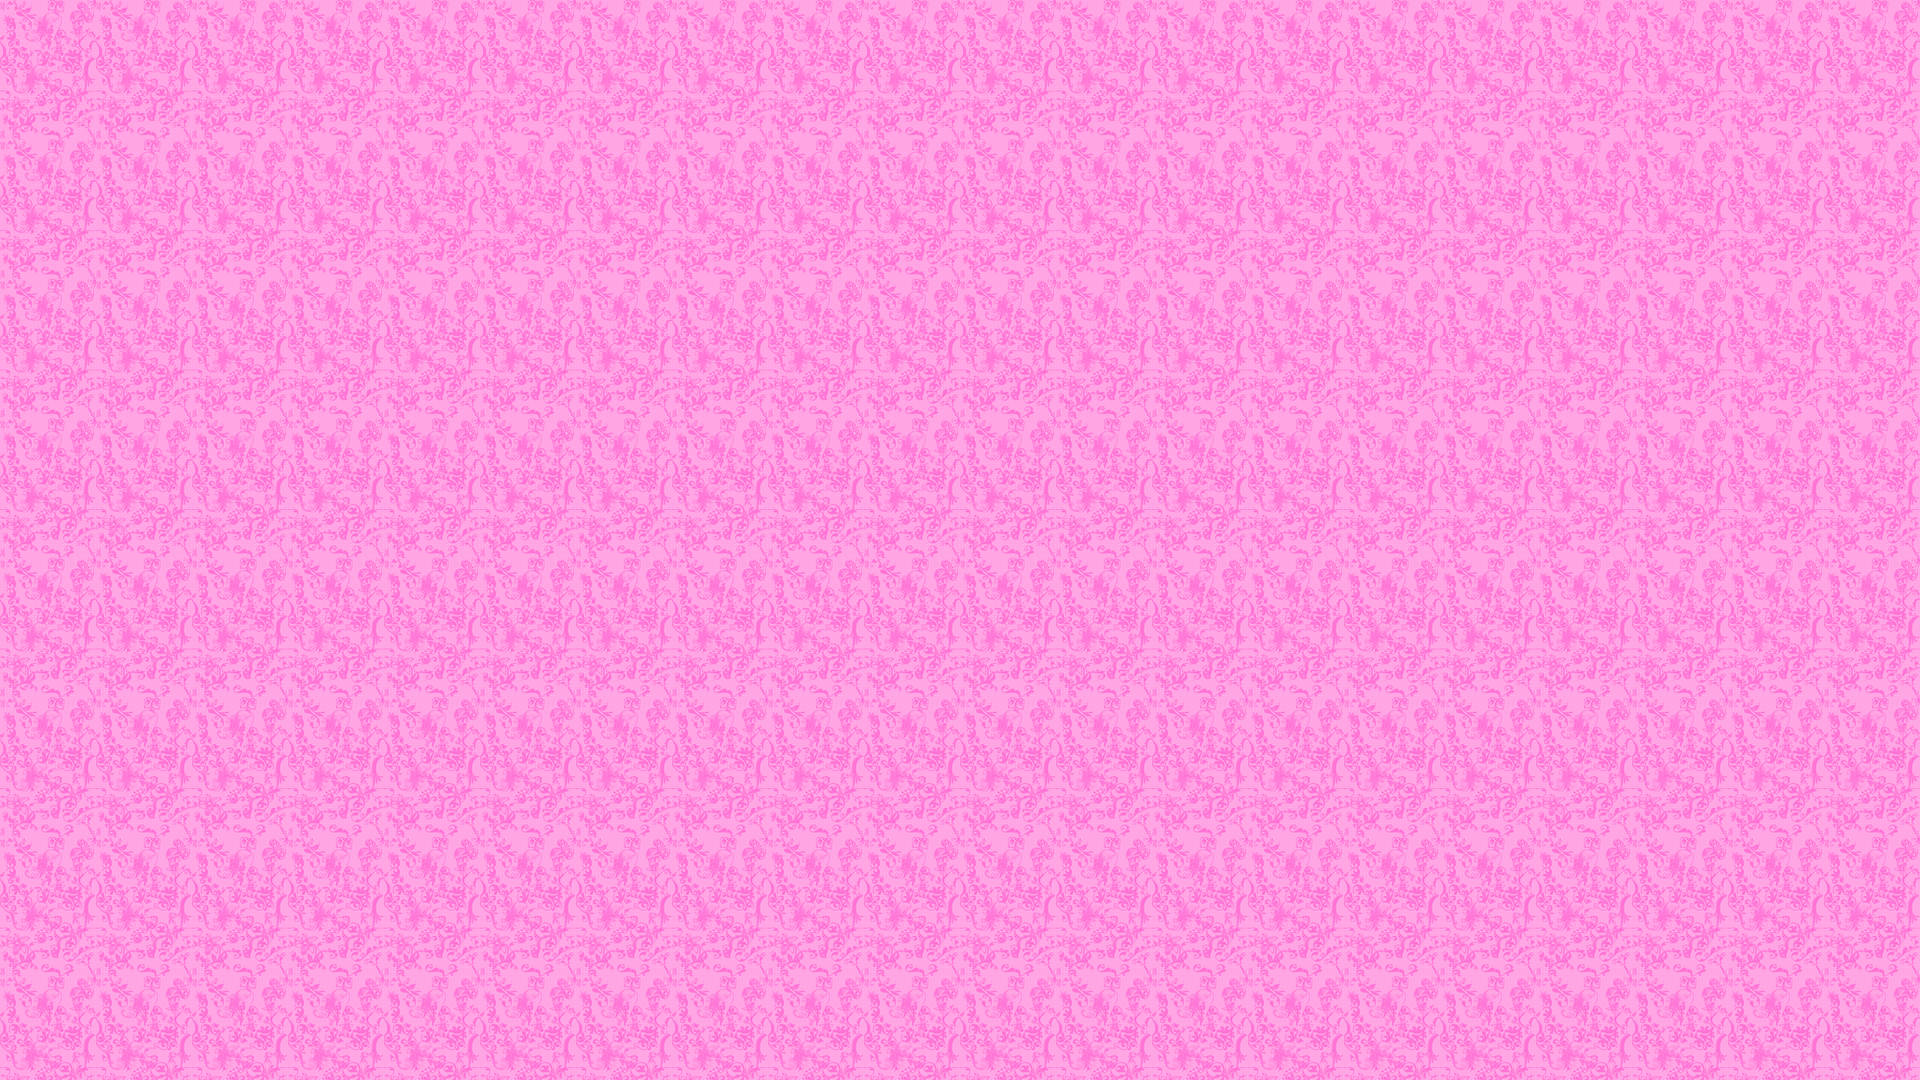 Hot Pink With Light Colored Patterns Wallpaper